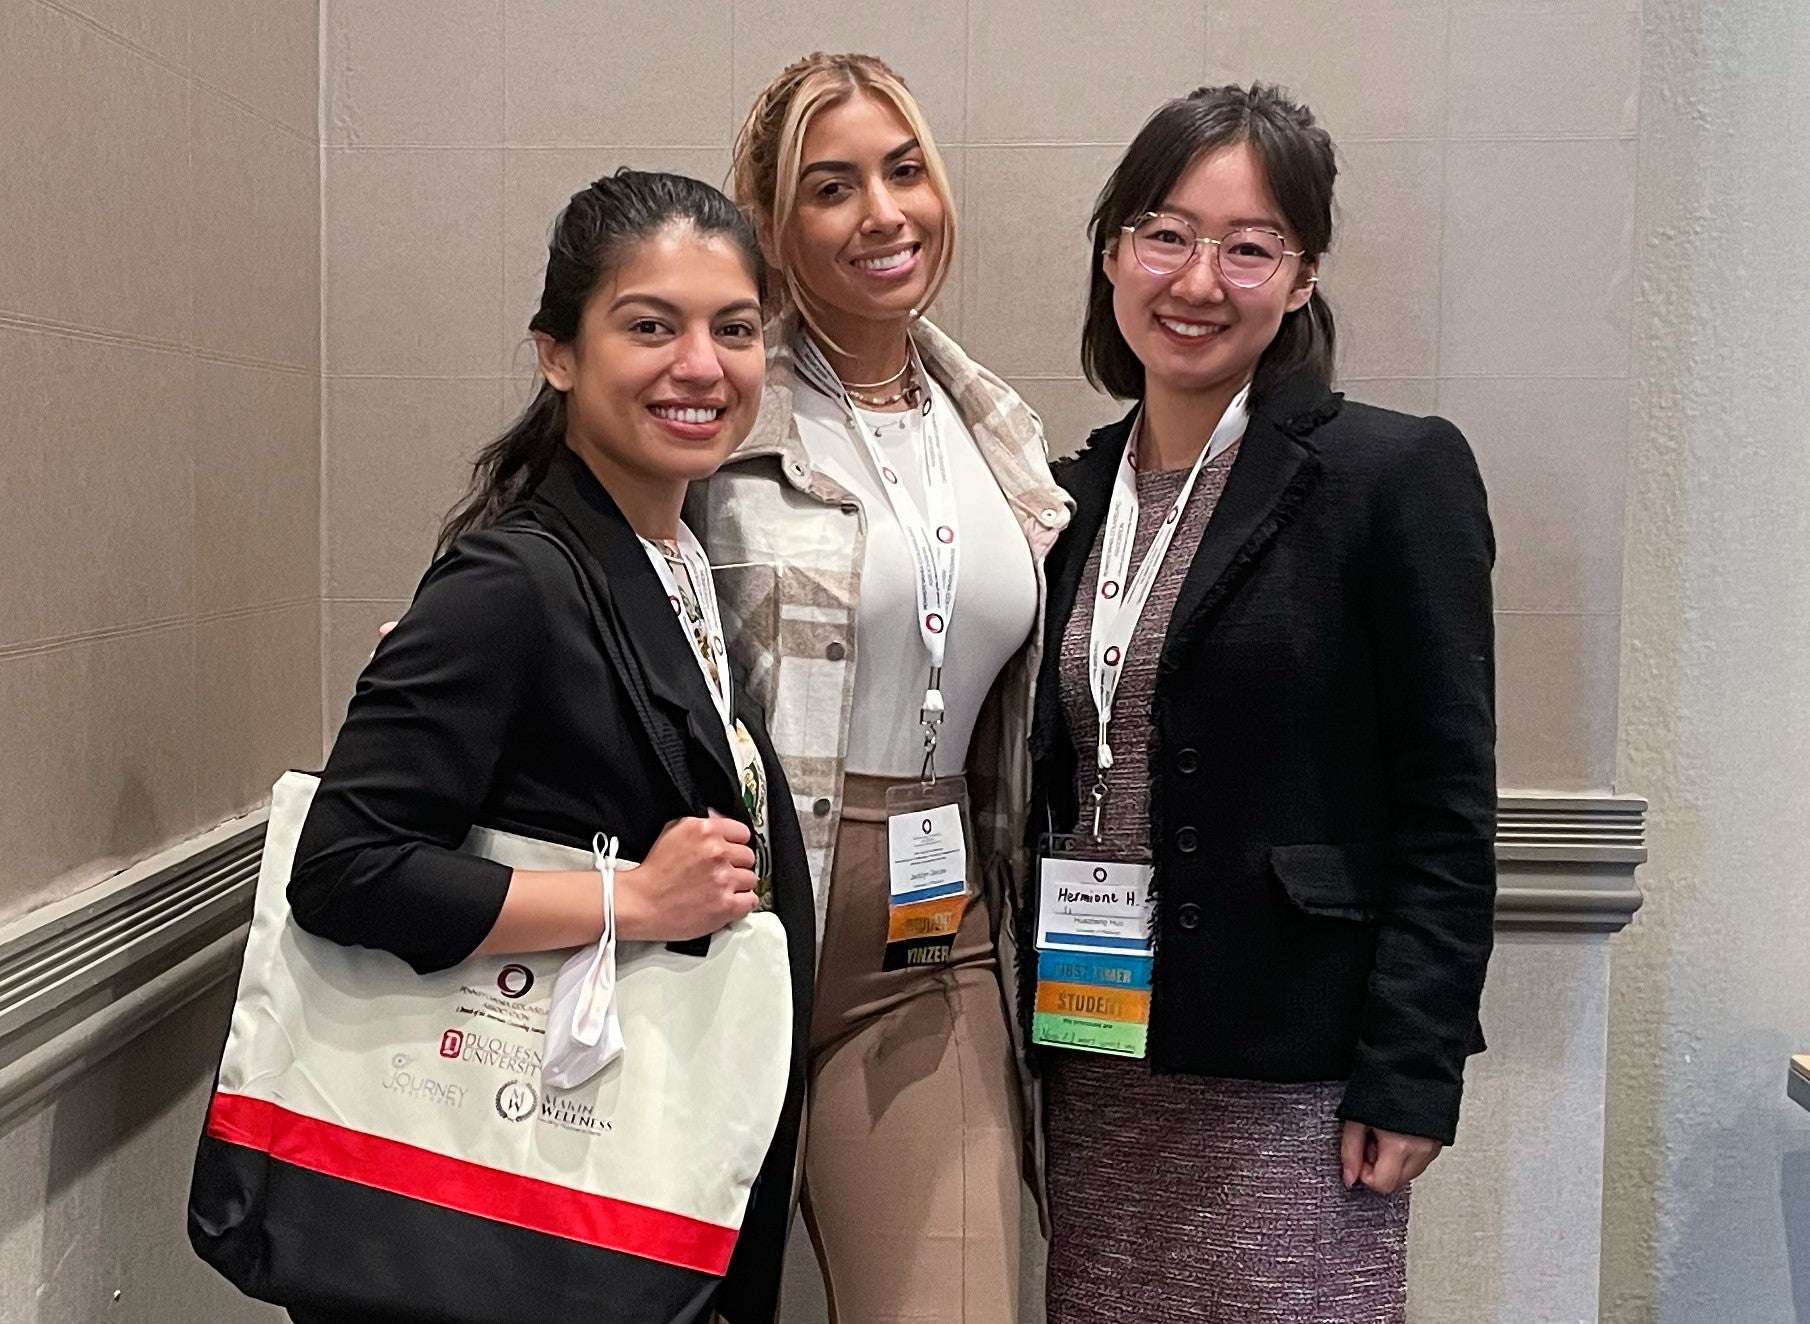 Garces (center) with other Pitt Counseling graduate students at the PCA conference